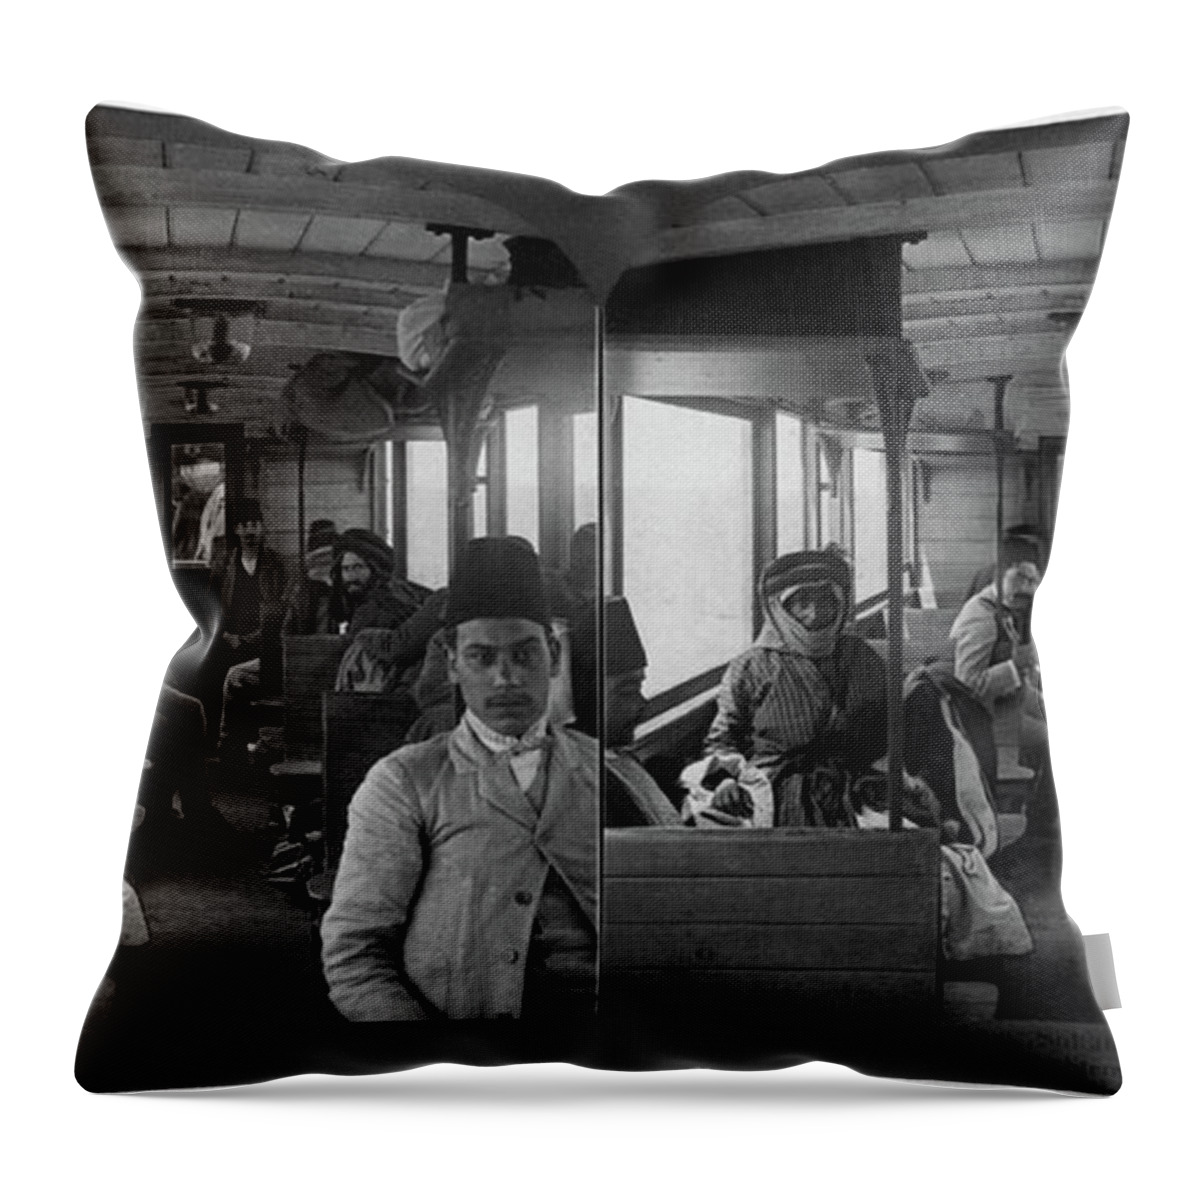 1908 Throw Pillow featuring the painting Syria Train, C1908 by Granger